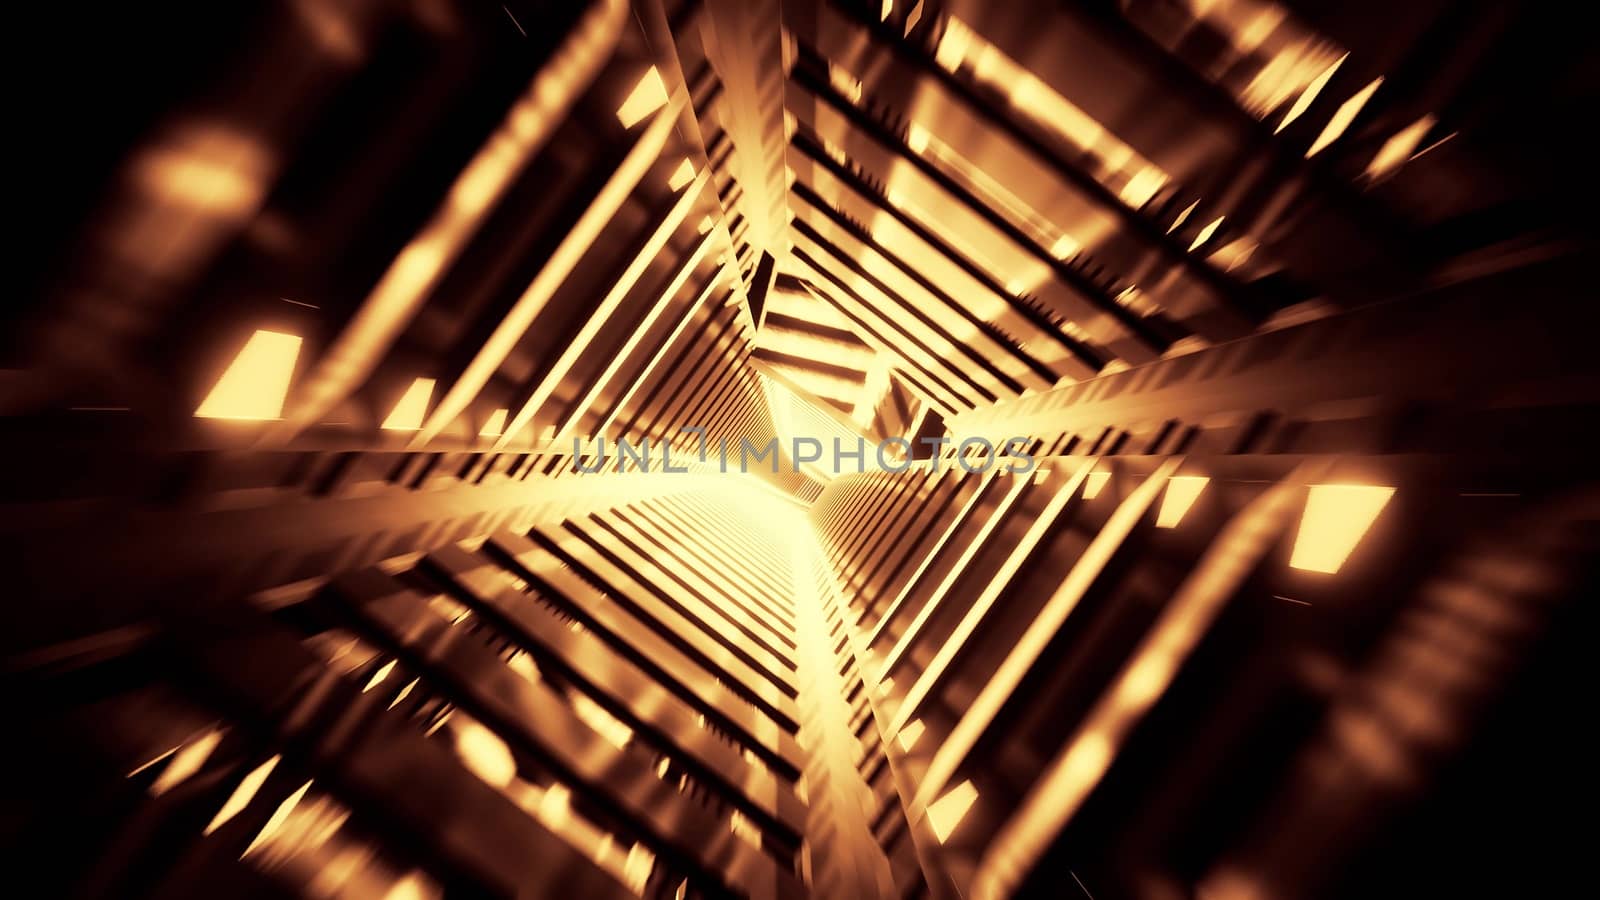 abwtract glowing futuristic scifi subway tunnel corridor 3d rendering wallpaper background design by tunnelmotions